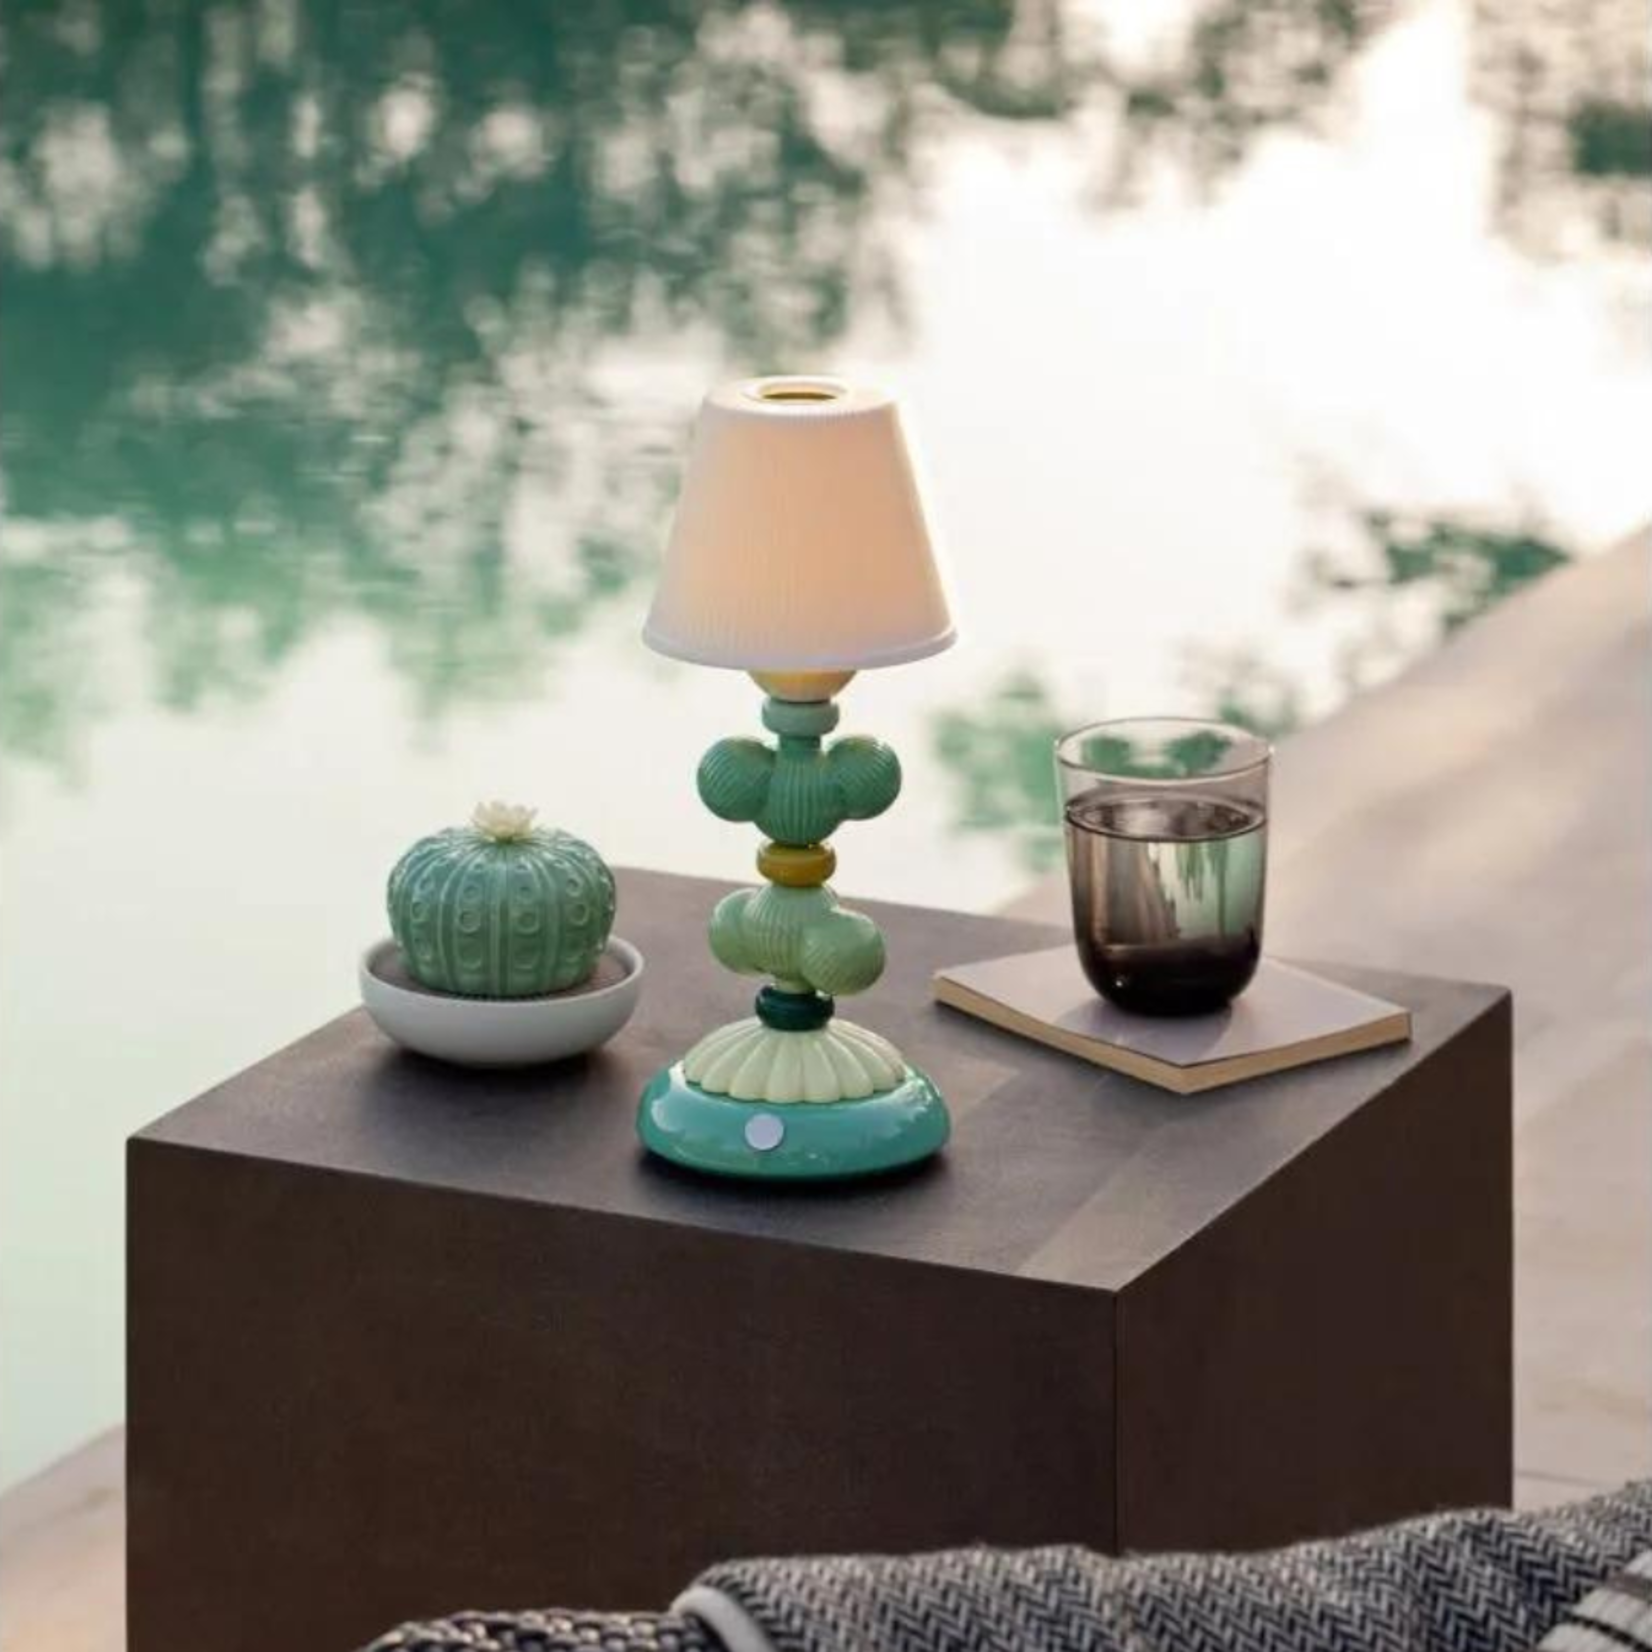 Lladro Cactus Firefly Table Lamp -Green